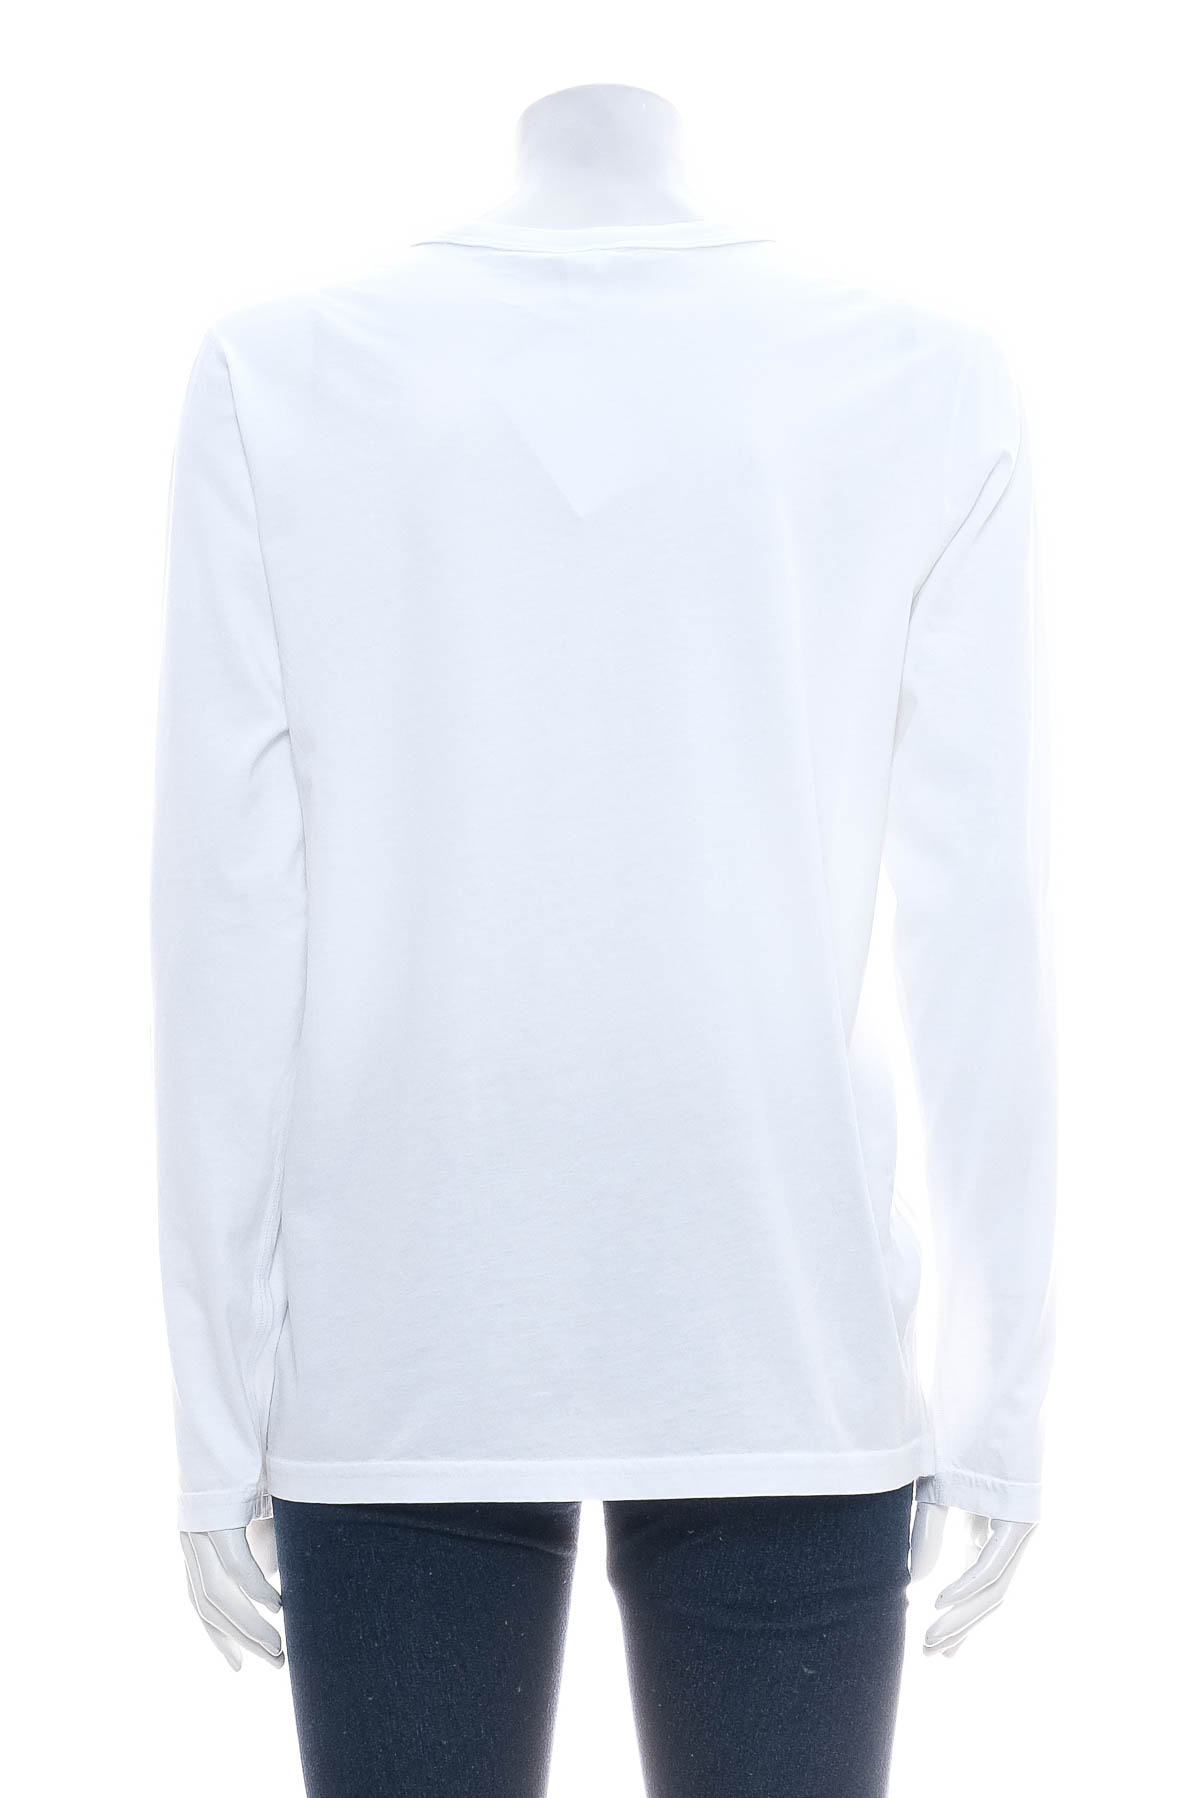 Women's blouse - Reigning Champ - 1